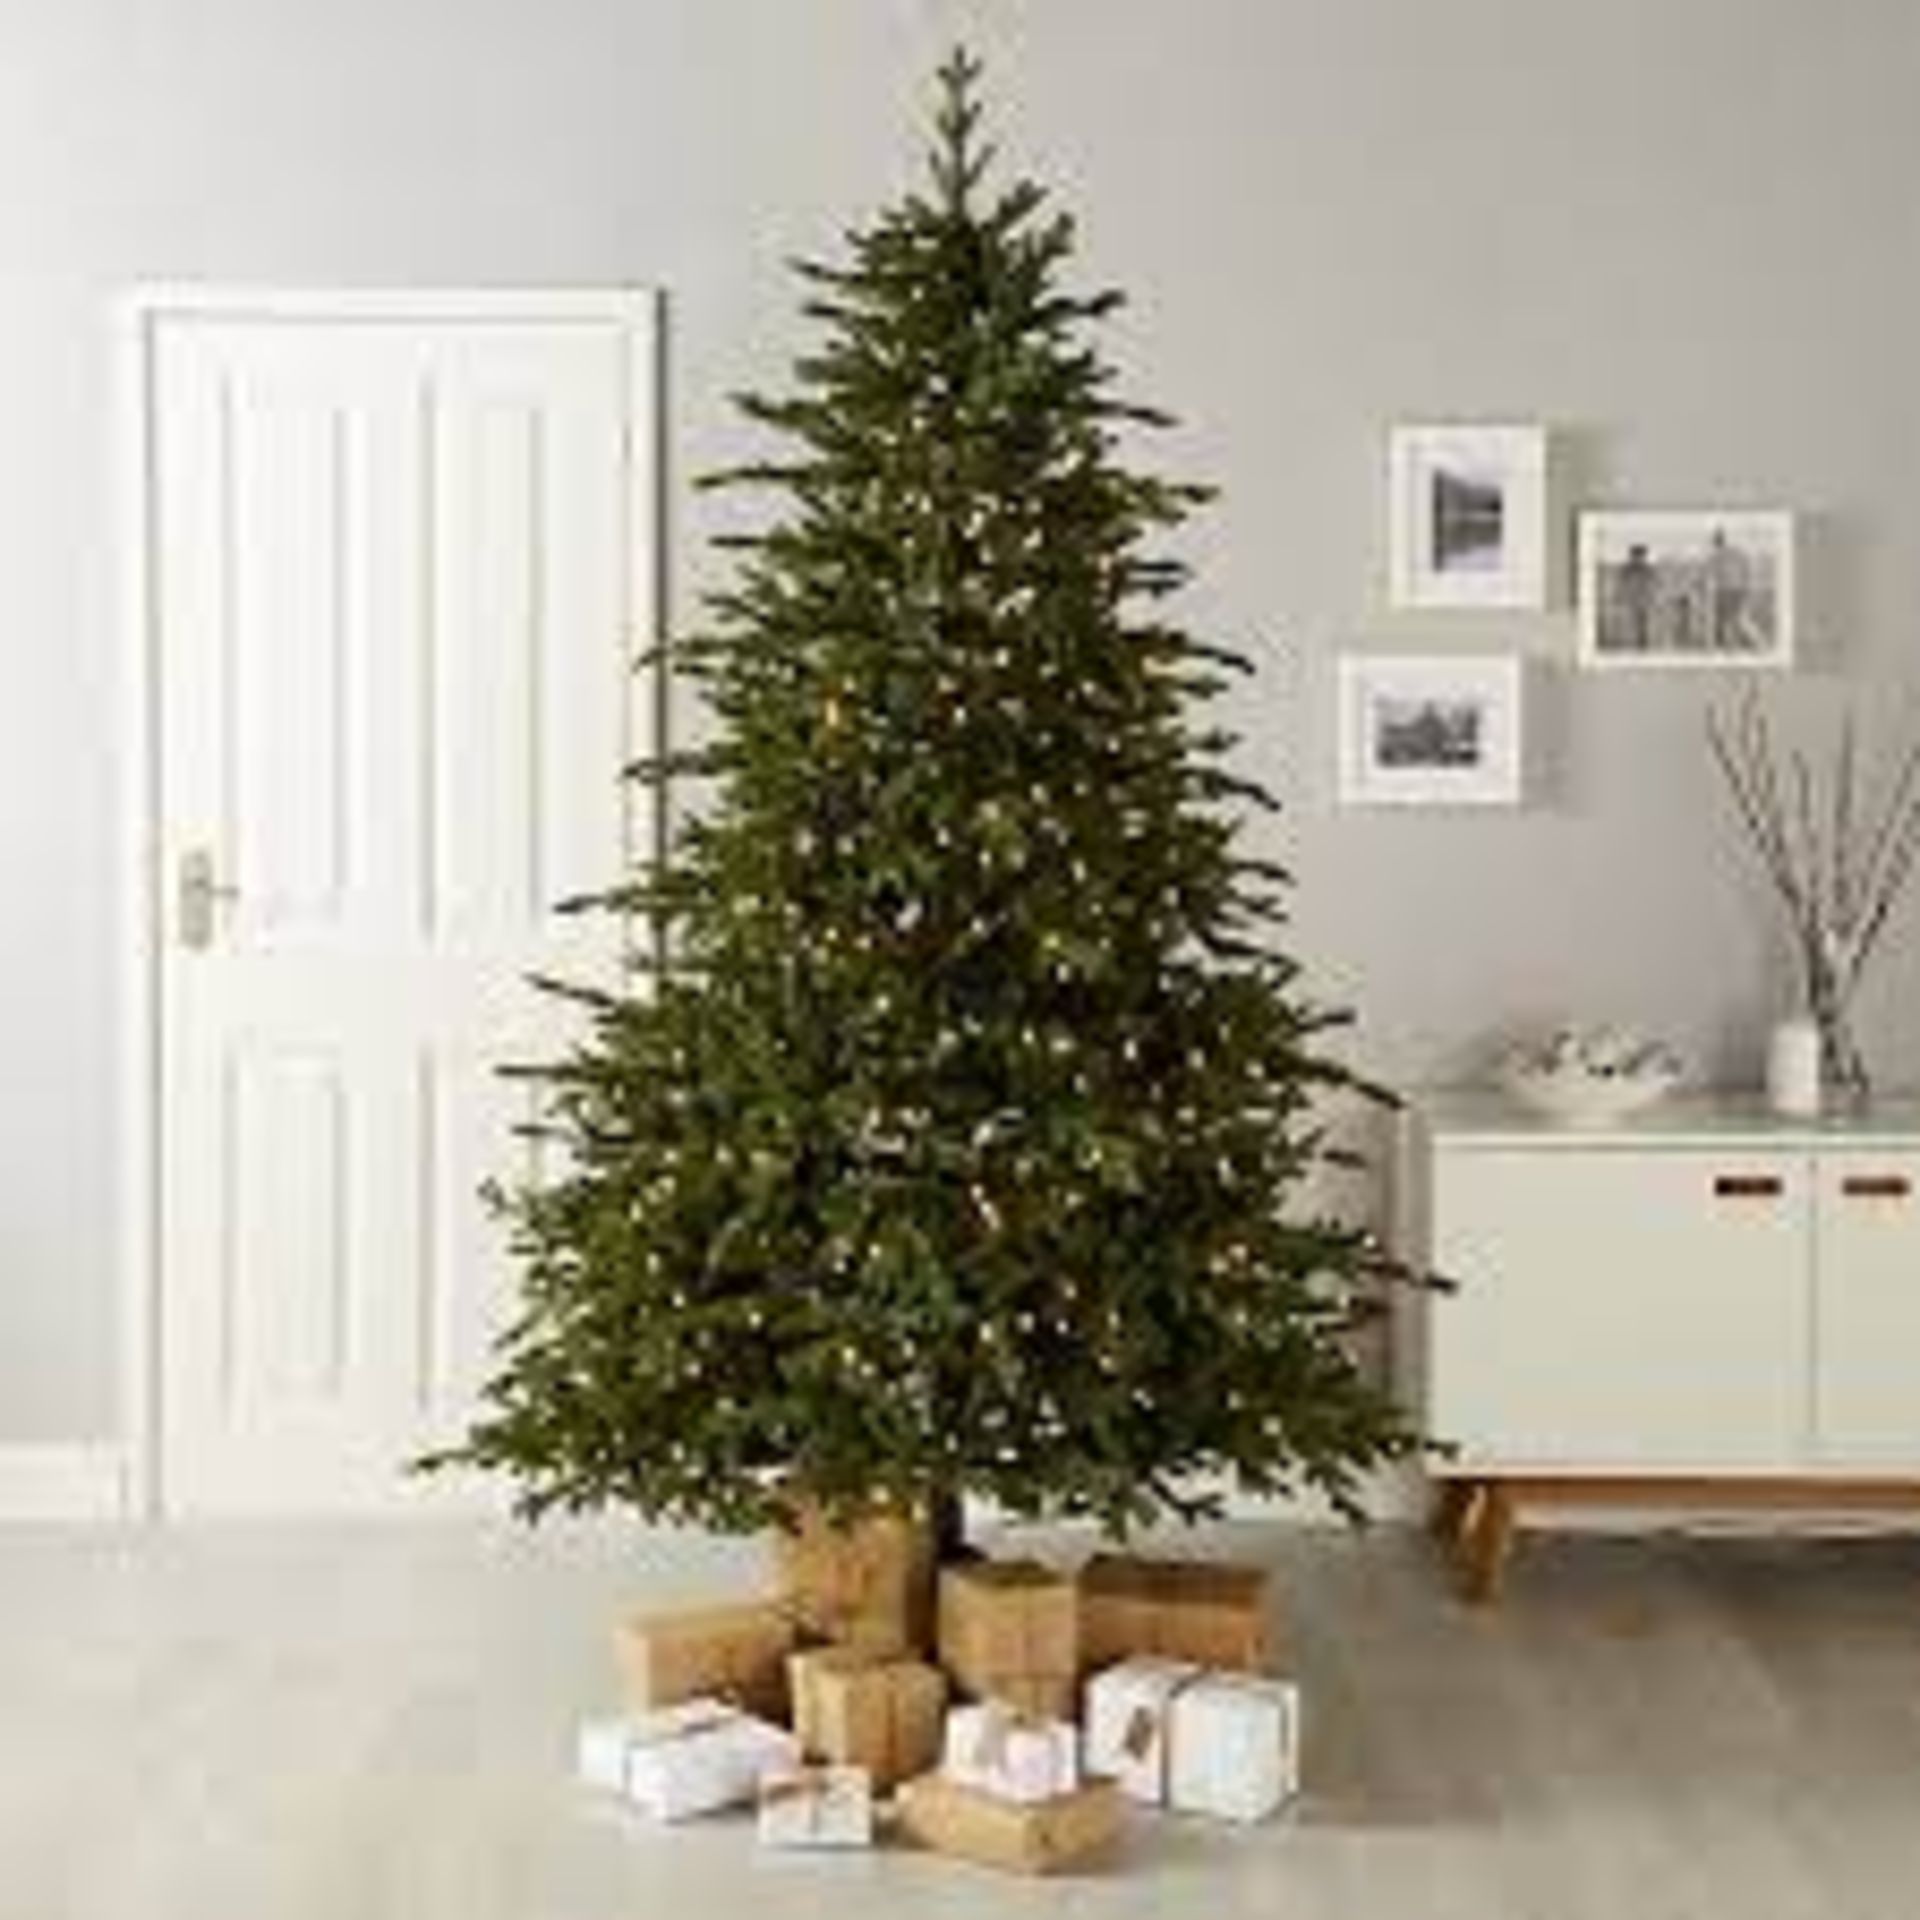 7.5ft Full Thetford Warm white LED Natural looking Pre-lit Artificial Christmas tree - ER49